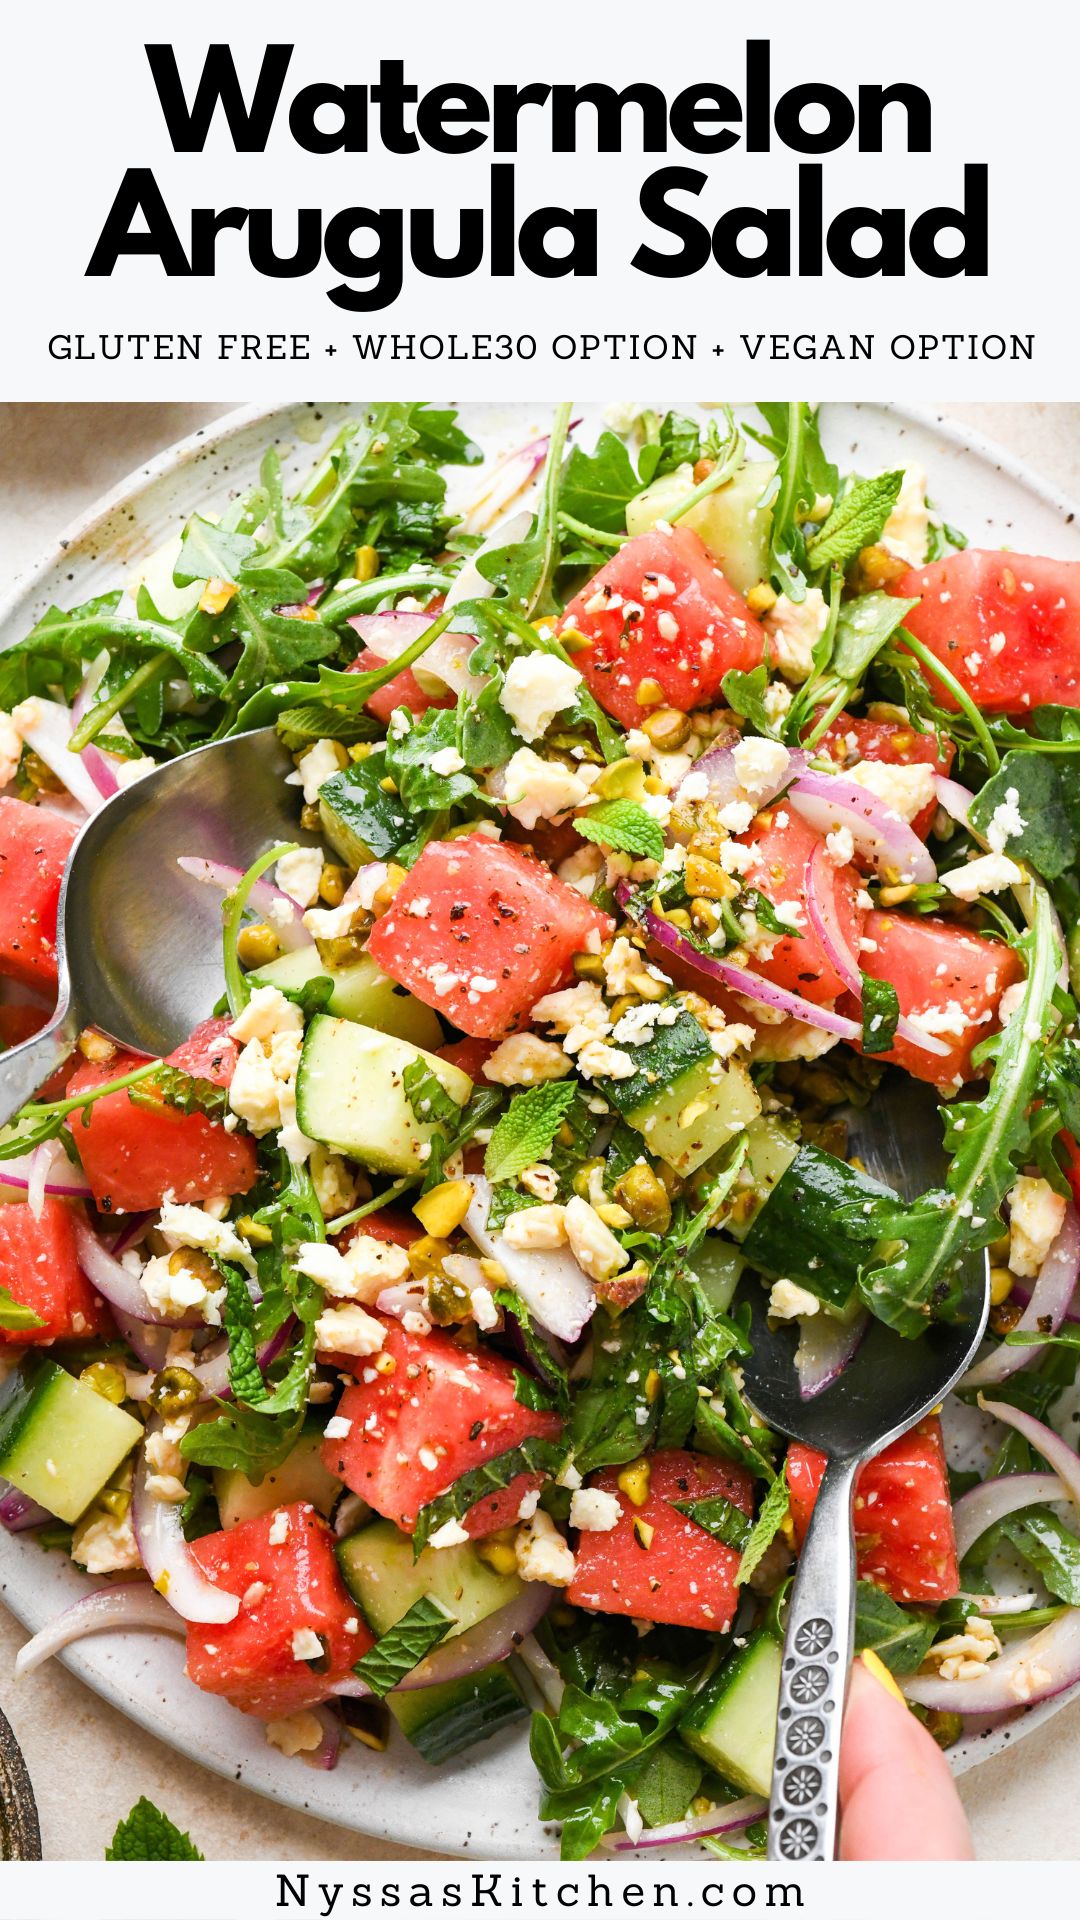 This watermelon arugula is a delightfully refreshing summer salad! Made with ripe and sweet watermelon chunks, diced cucumber, peppery arugula, briny feta cheese, fresh mint leaves, and chopped pistachios for crunch. The best salad to bring to cookouts, picnics, or family dinner. Gluten free, vegetarian, vegan option, paleo option, Whole30 option.